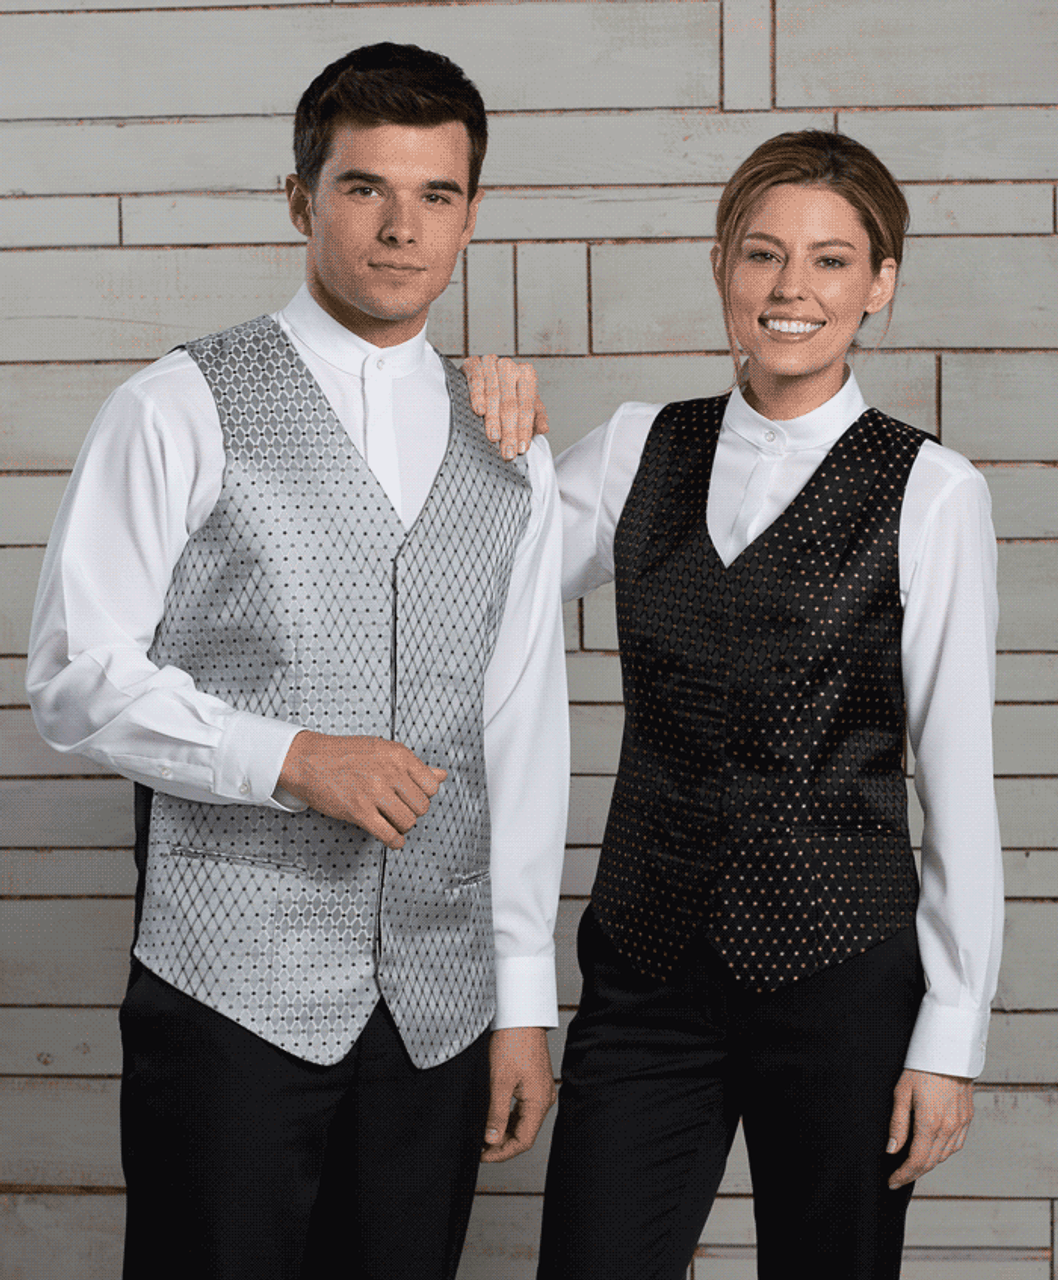 Silver and black patterned vest for your hotel or casino staff!